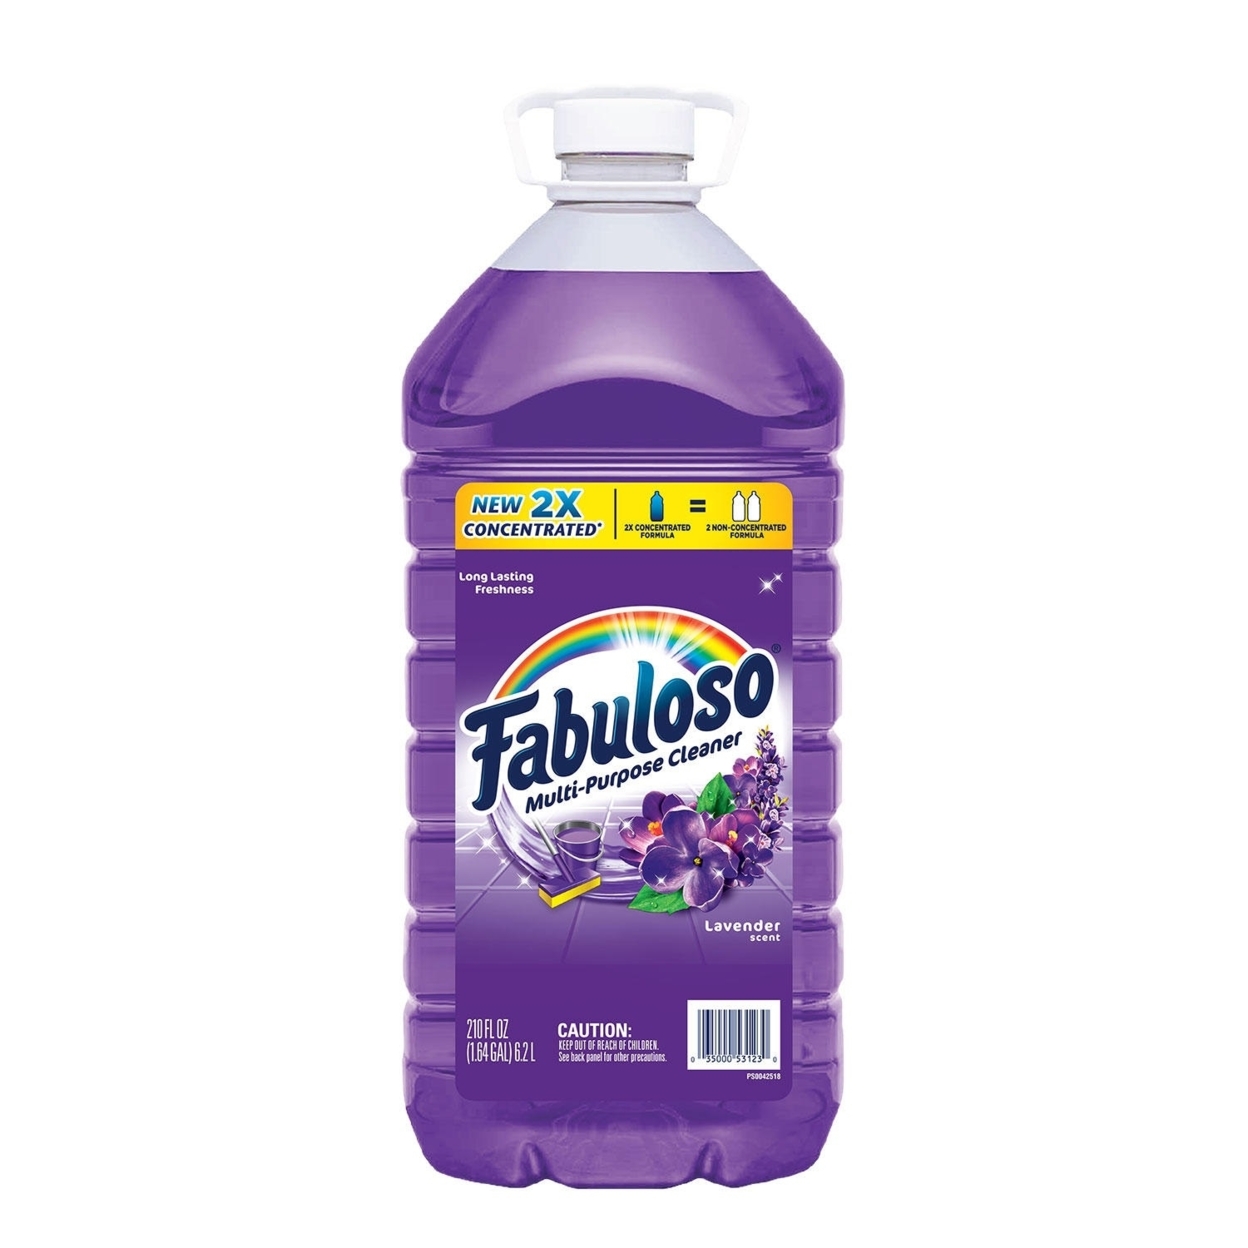 Fabuloso 2X Concentrated Multi-Purpose Cleaner, Lavender (210 Fluid Ounce)